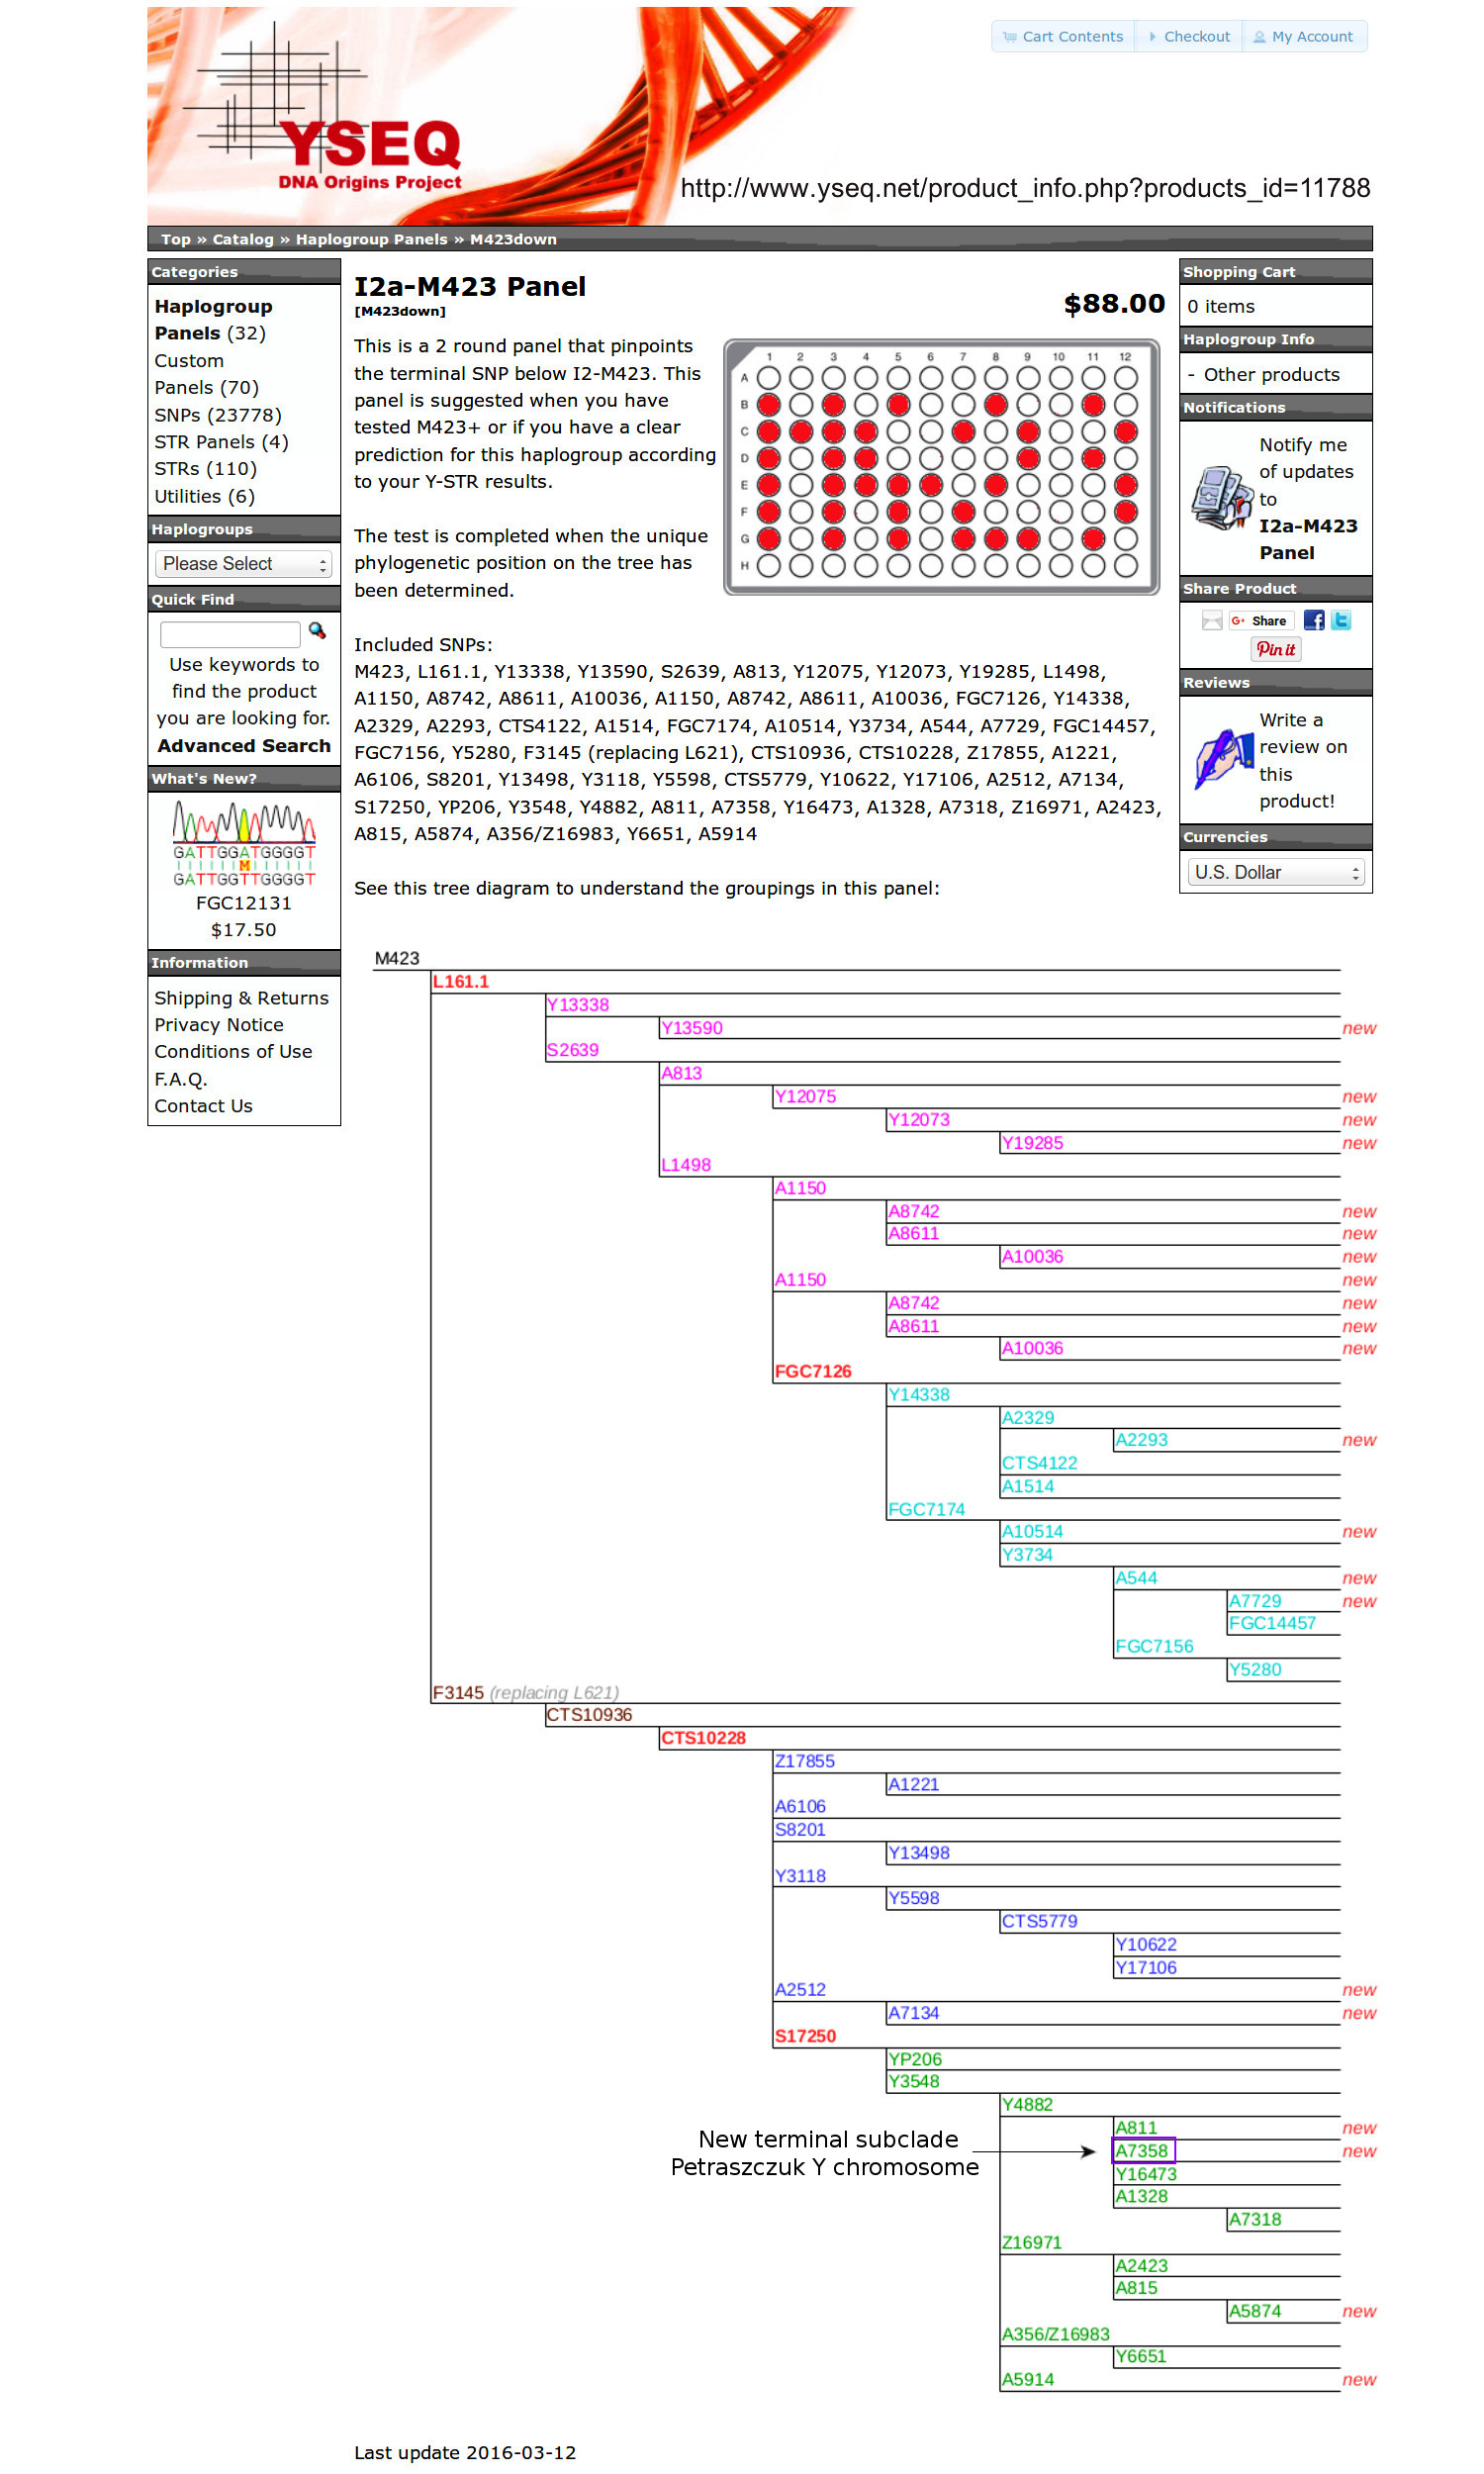 FTDNA clade tree update